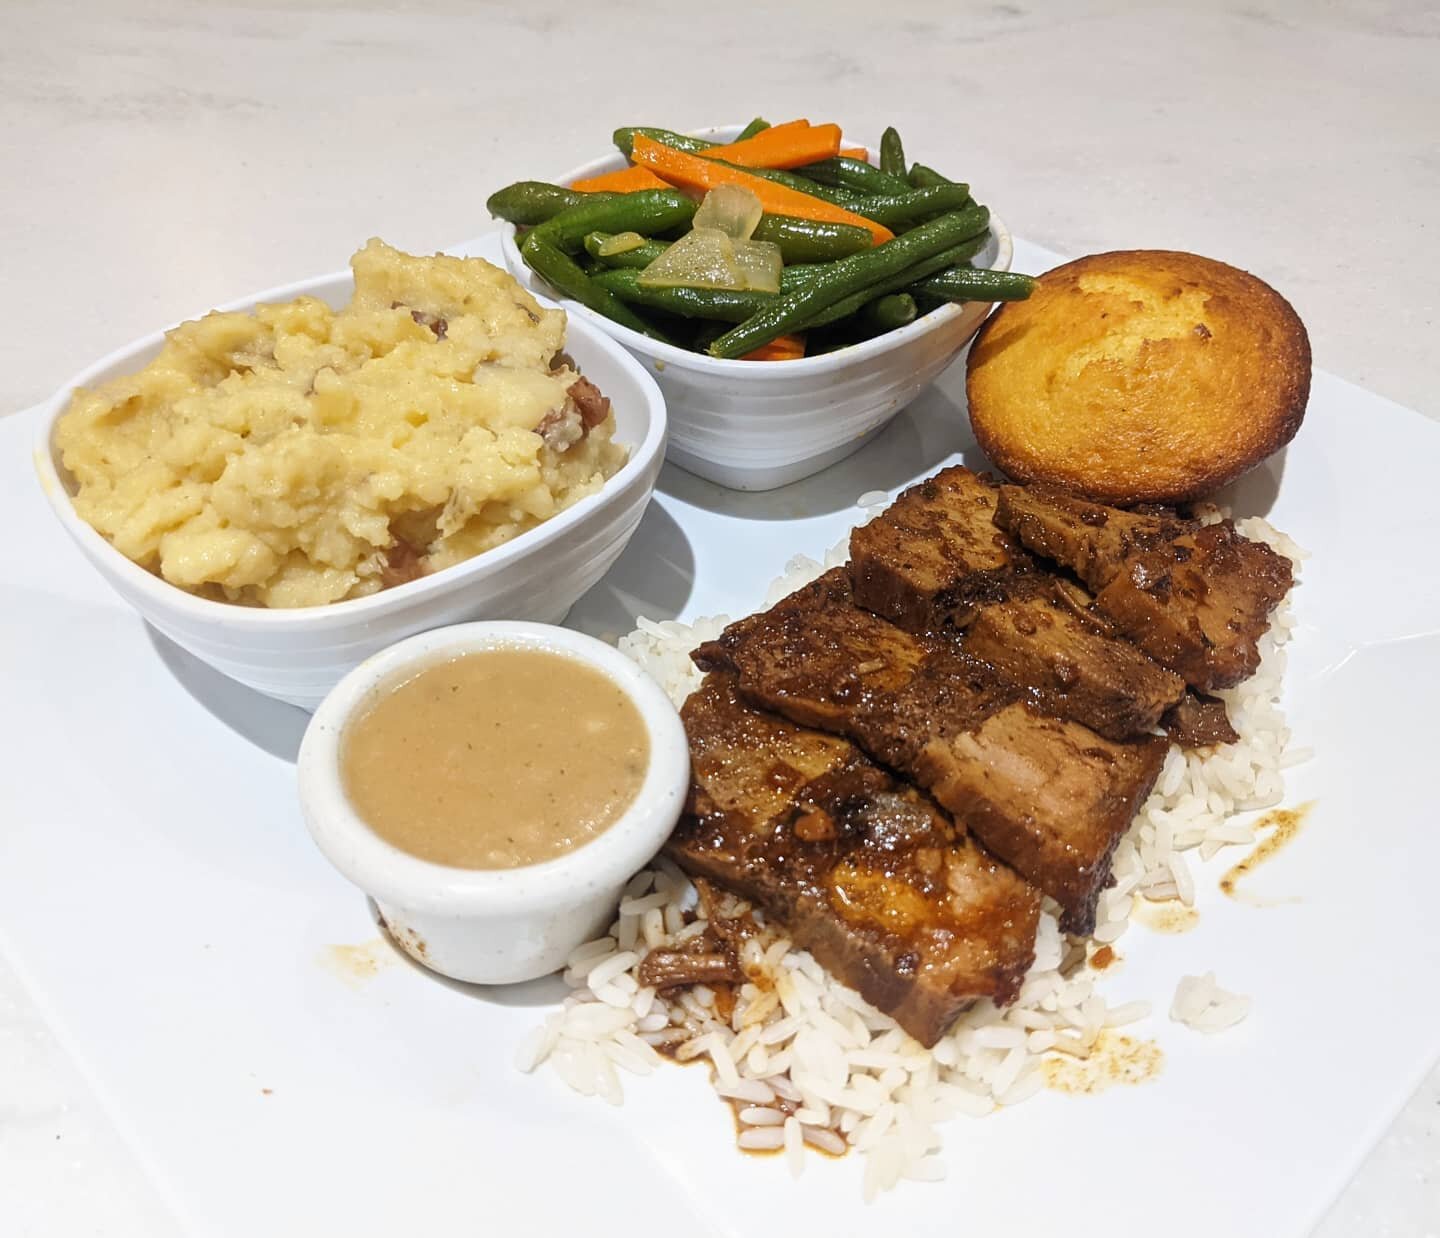 Looking for catering for your holiday company party? We offer prepackaged meals! Call our catering line today 323-918-2087 ext. 2

Picture 1- mashed potatoes, string beans, corn bread, rice and beef brisket

Picture 2- mashed potatoes, string beans, 